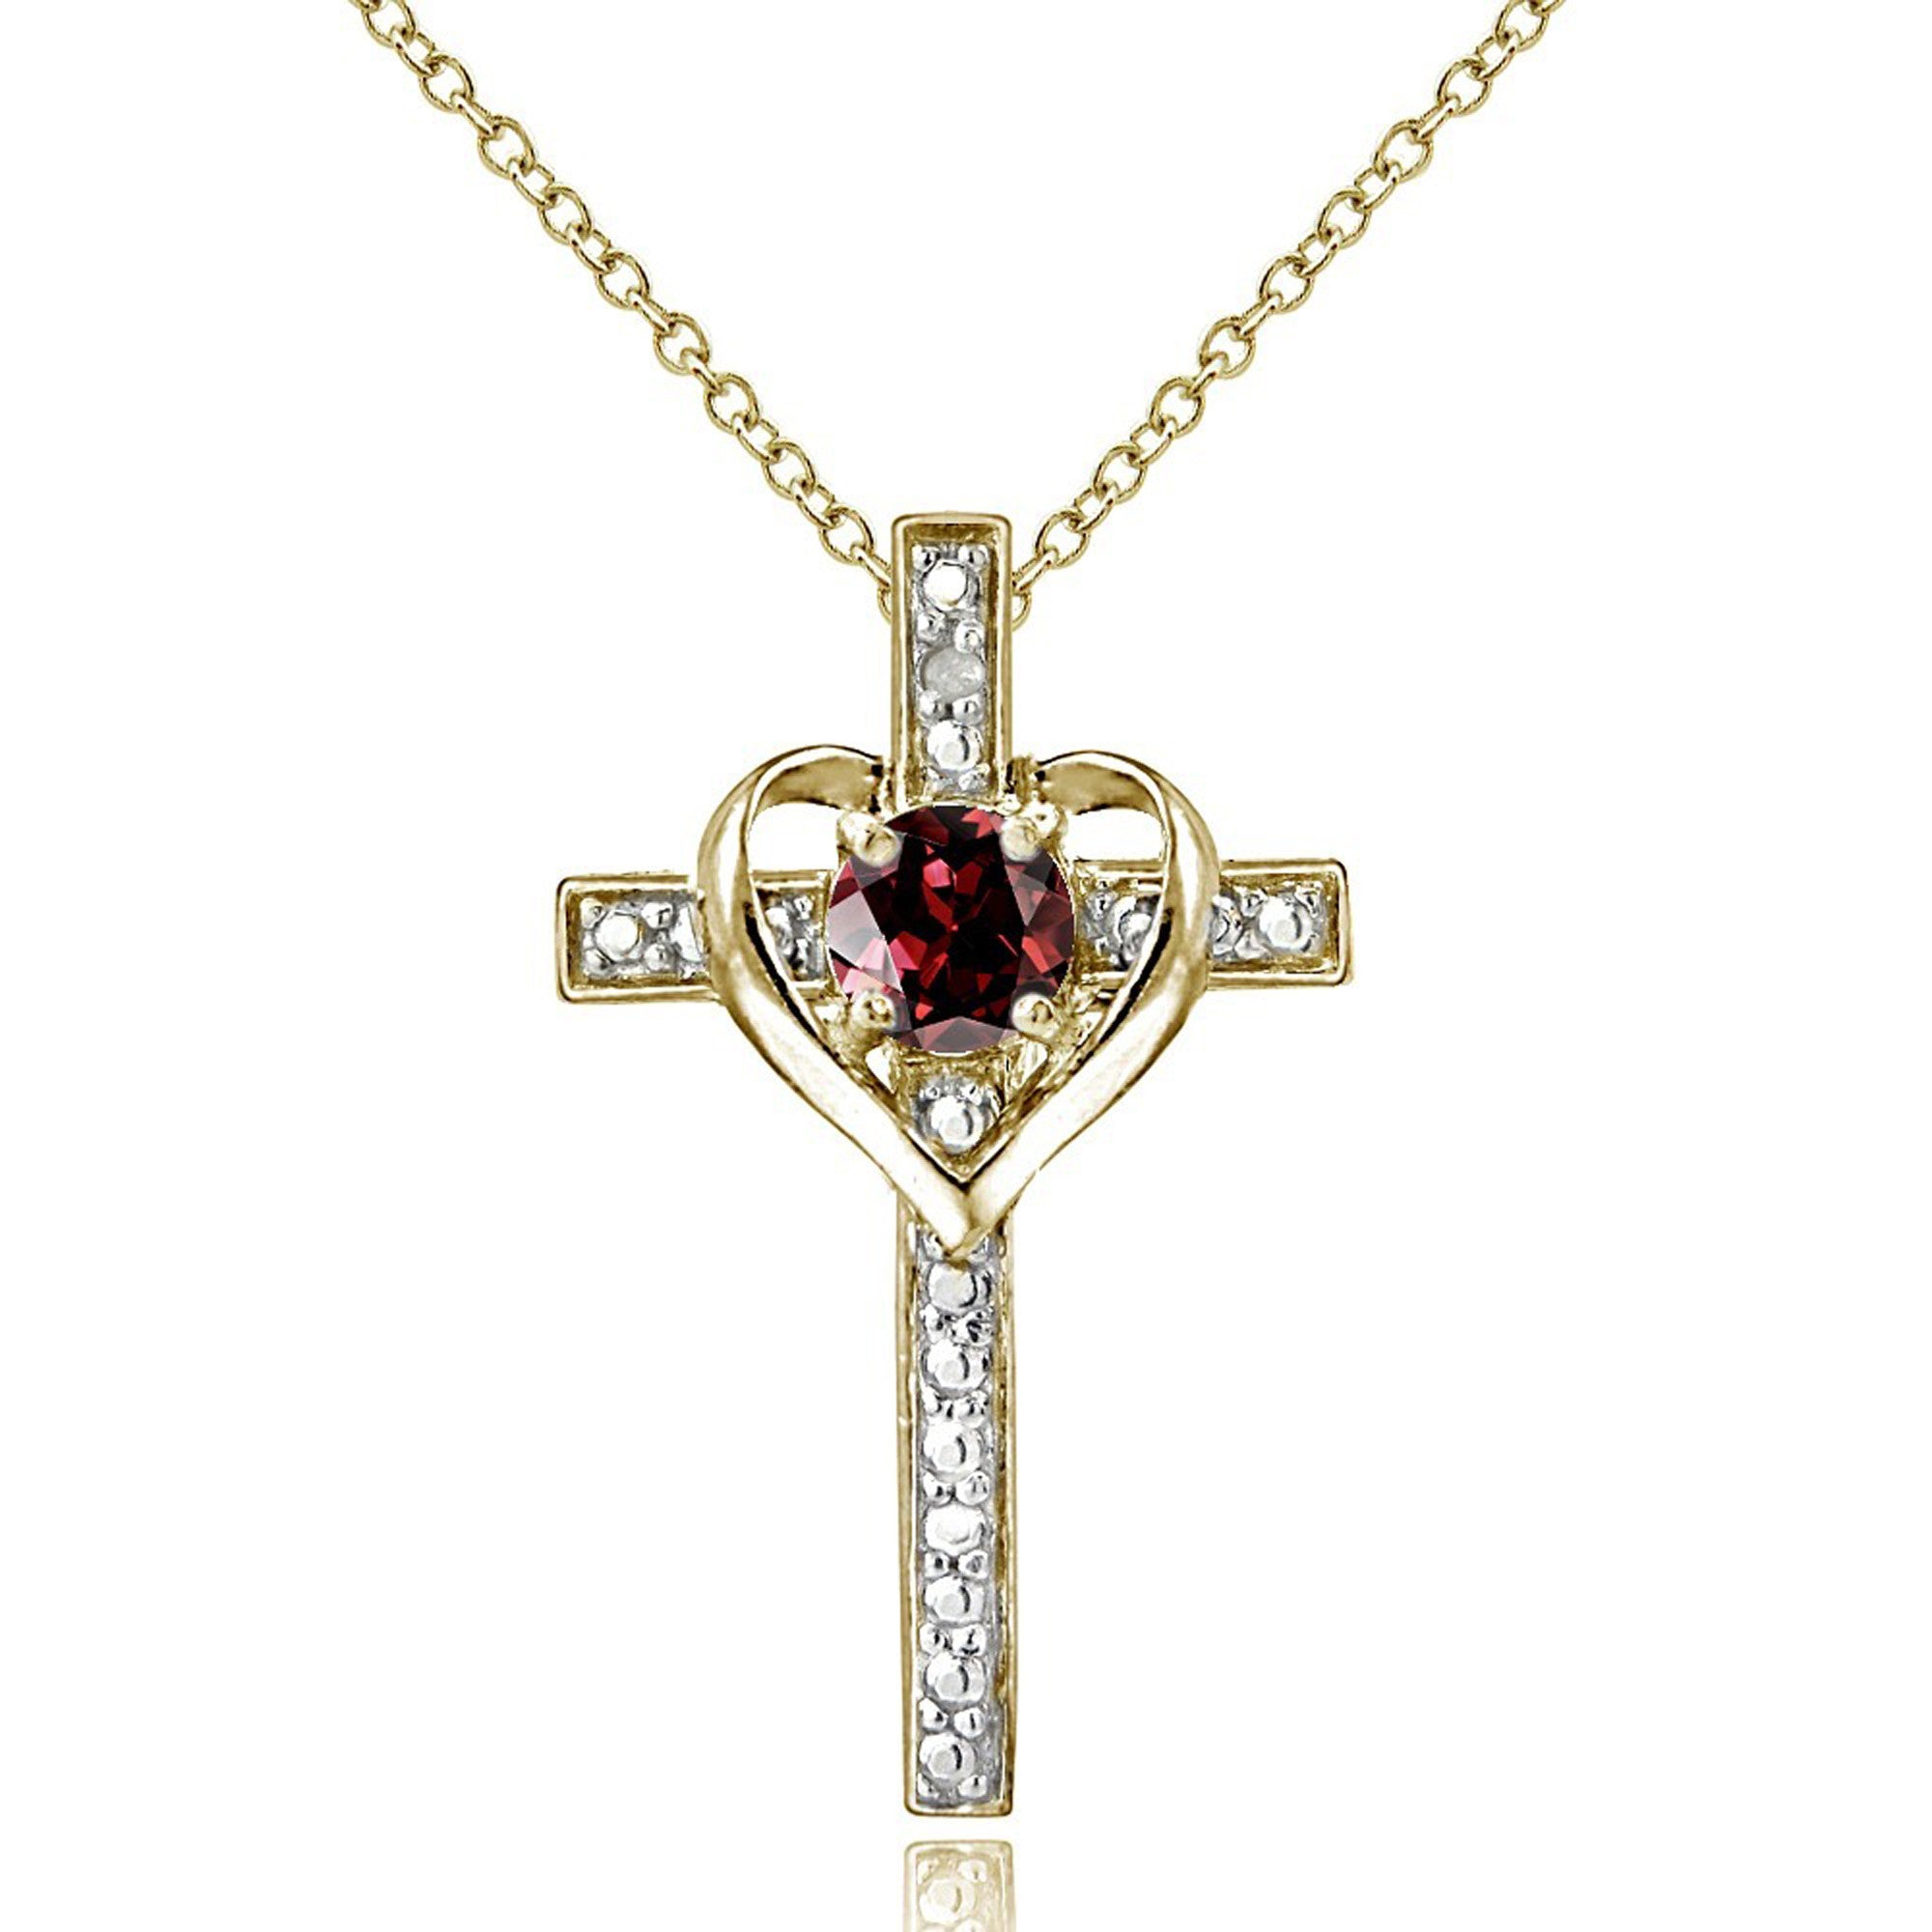 Diamond Accented Sterling Silver Cross Necklace - Gold Over Silver / Garnet